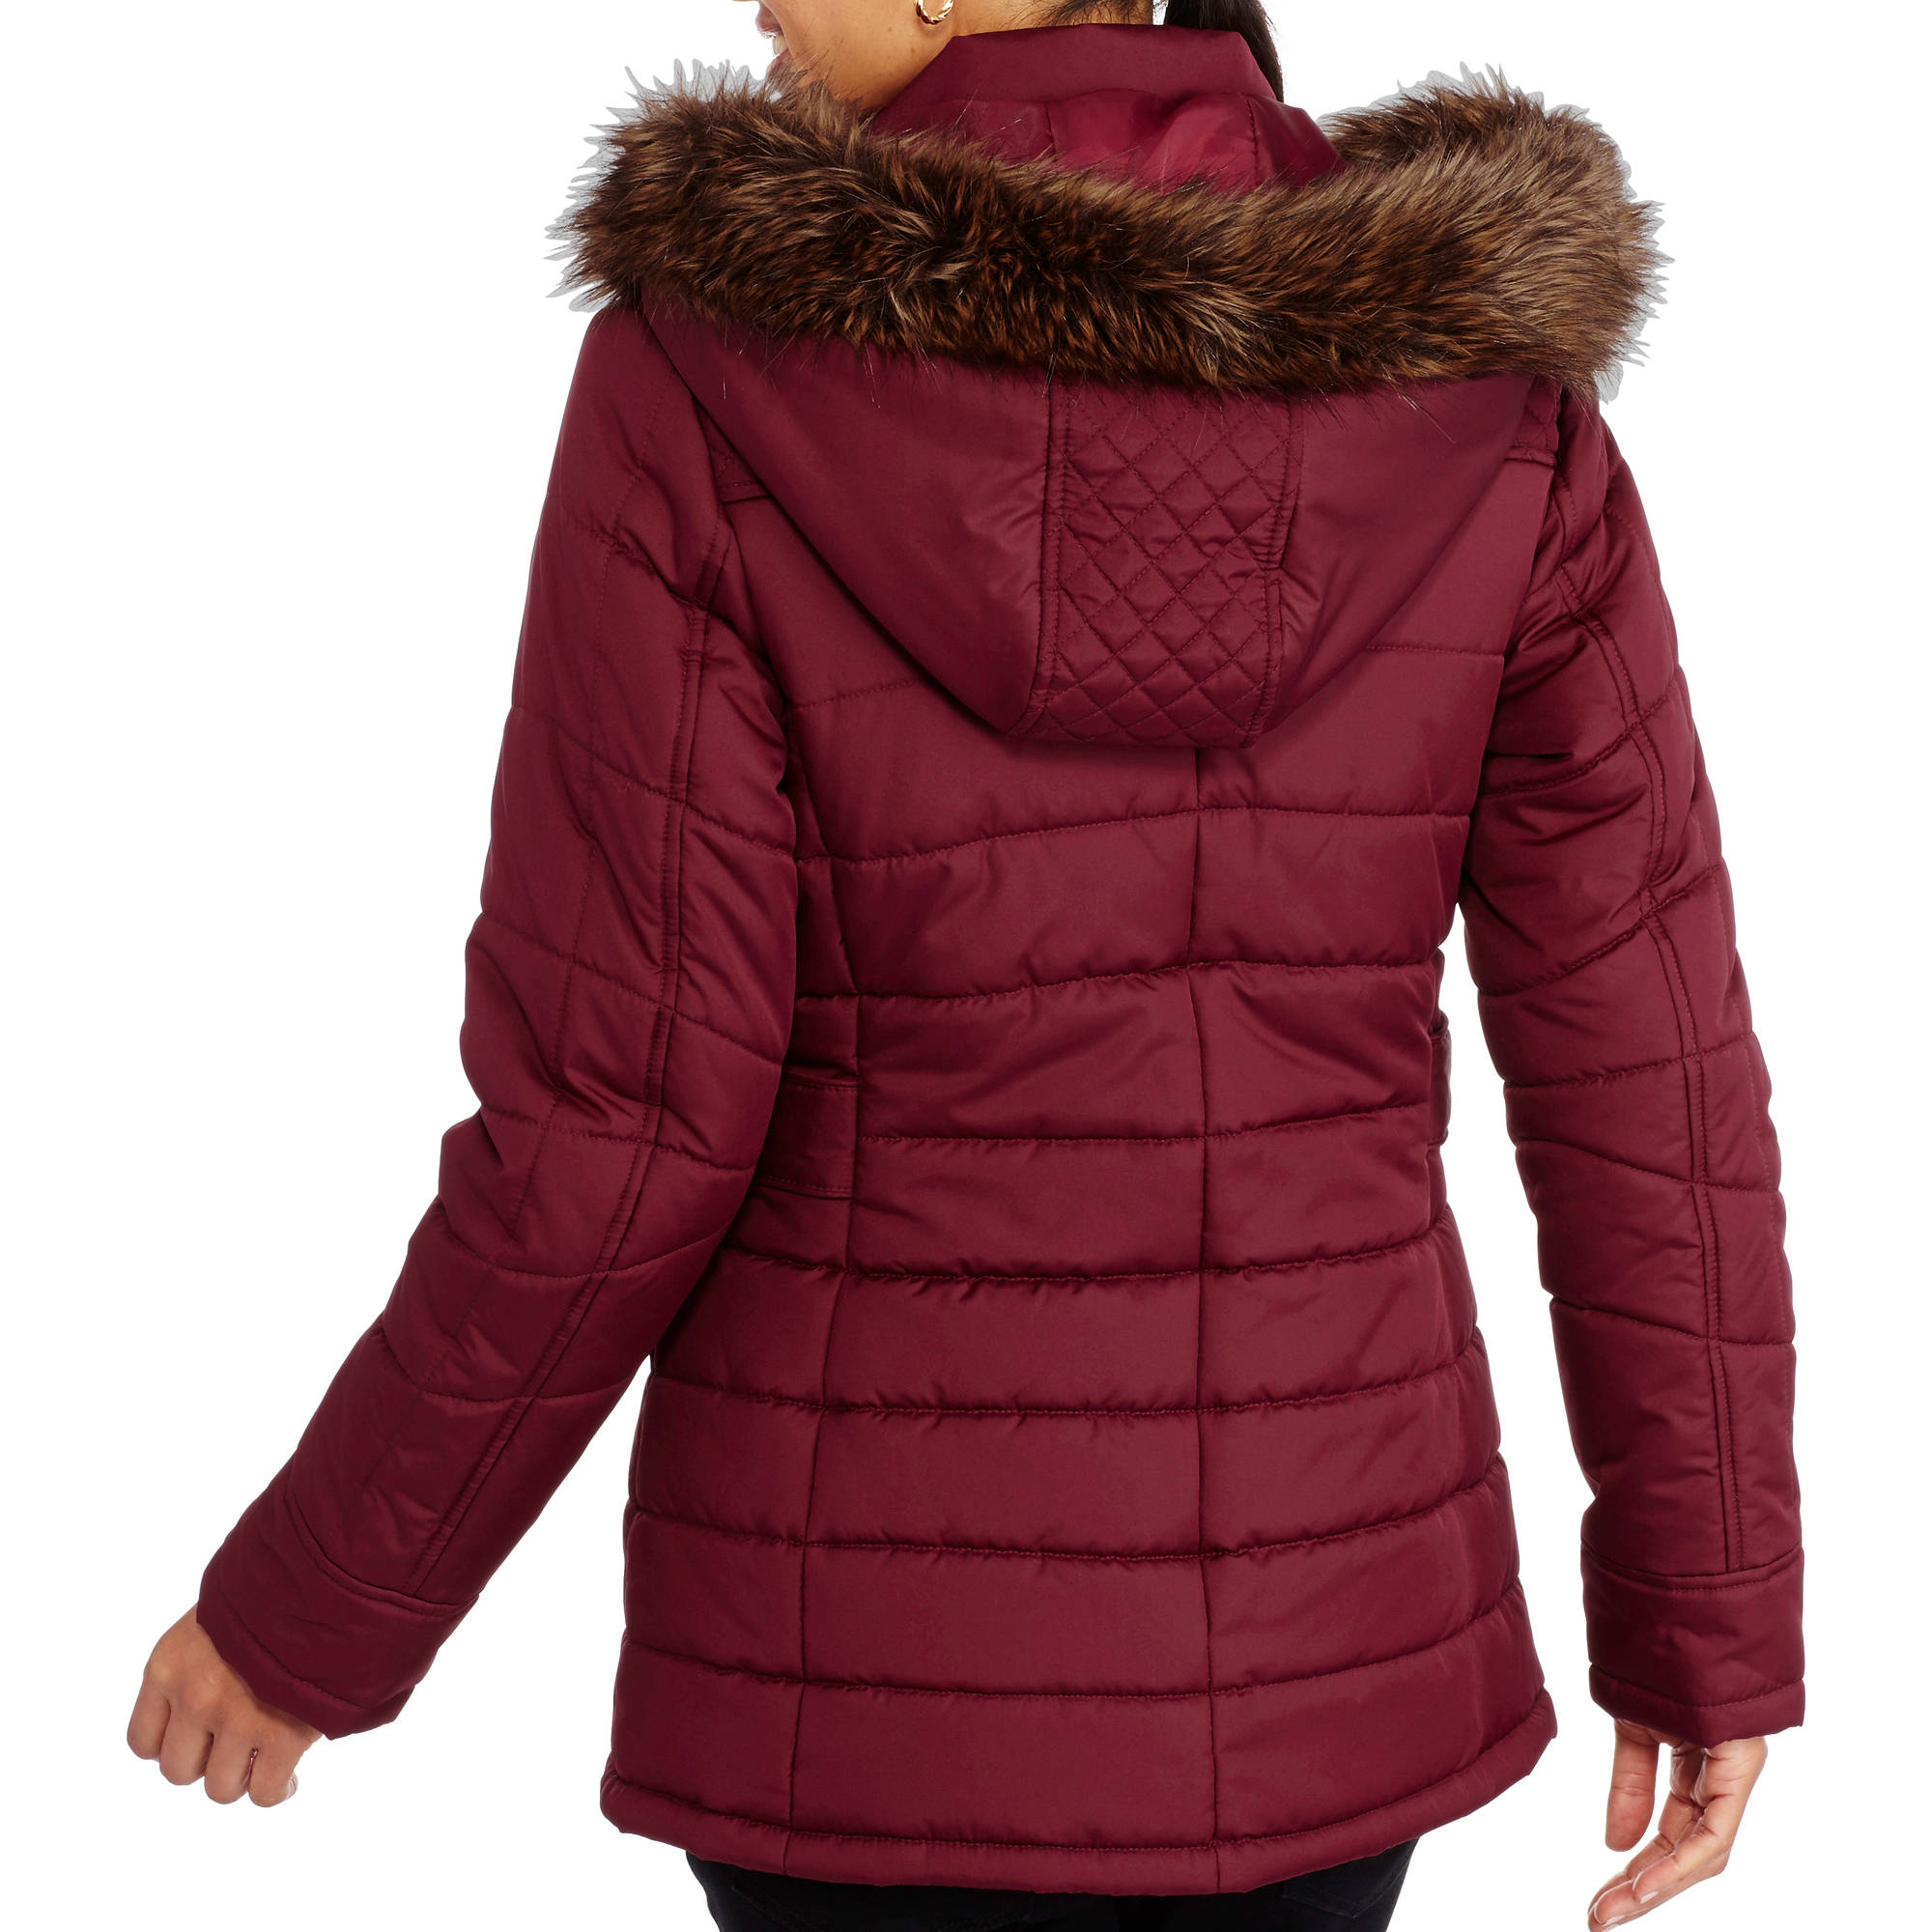 Women's Fashion Puffer Coat With Fur-Trimmed Hood - image 2 of 2